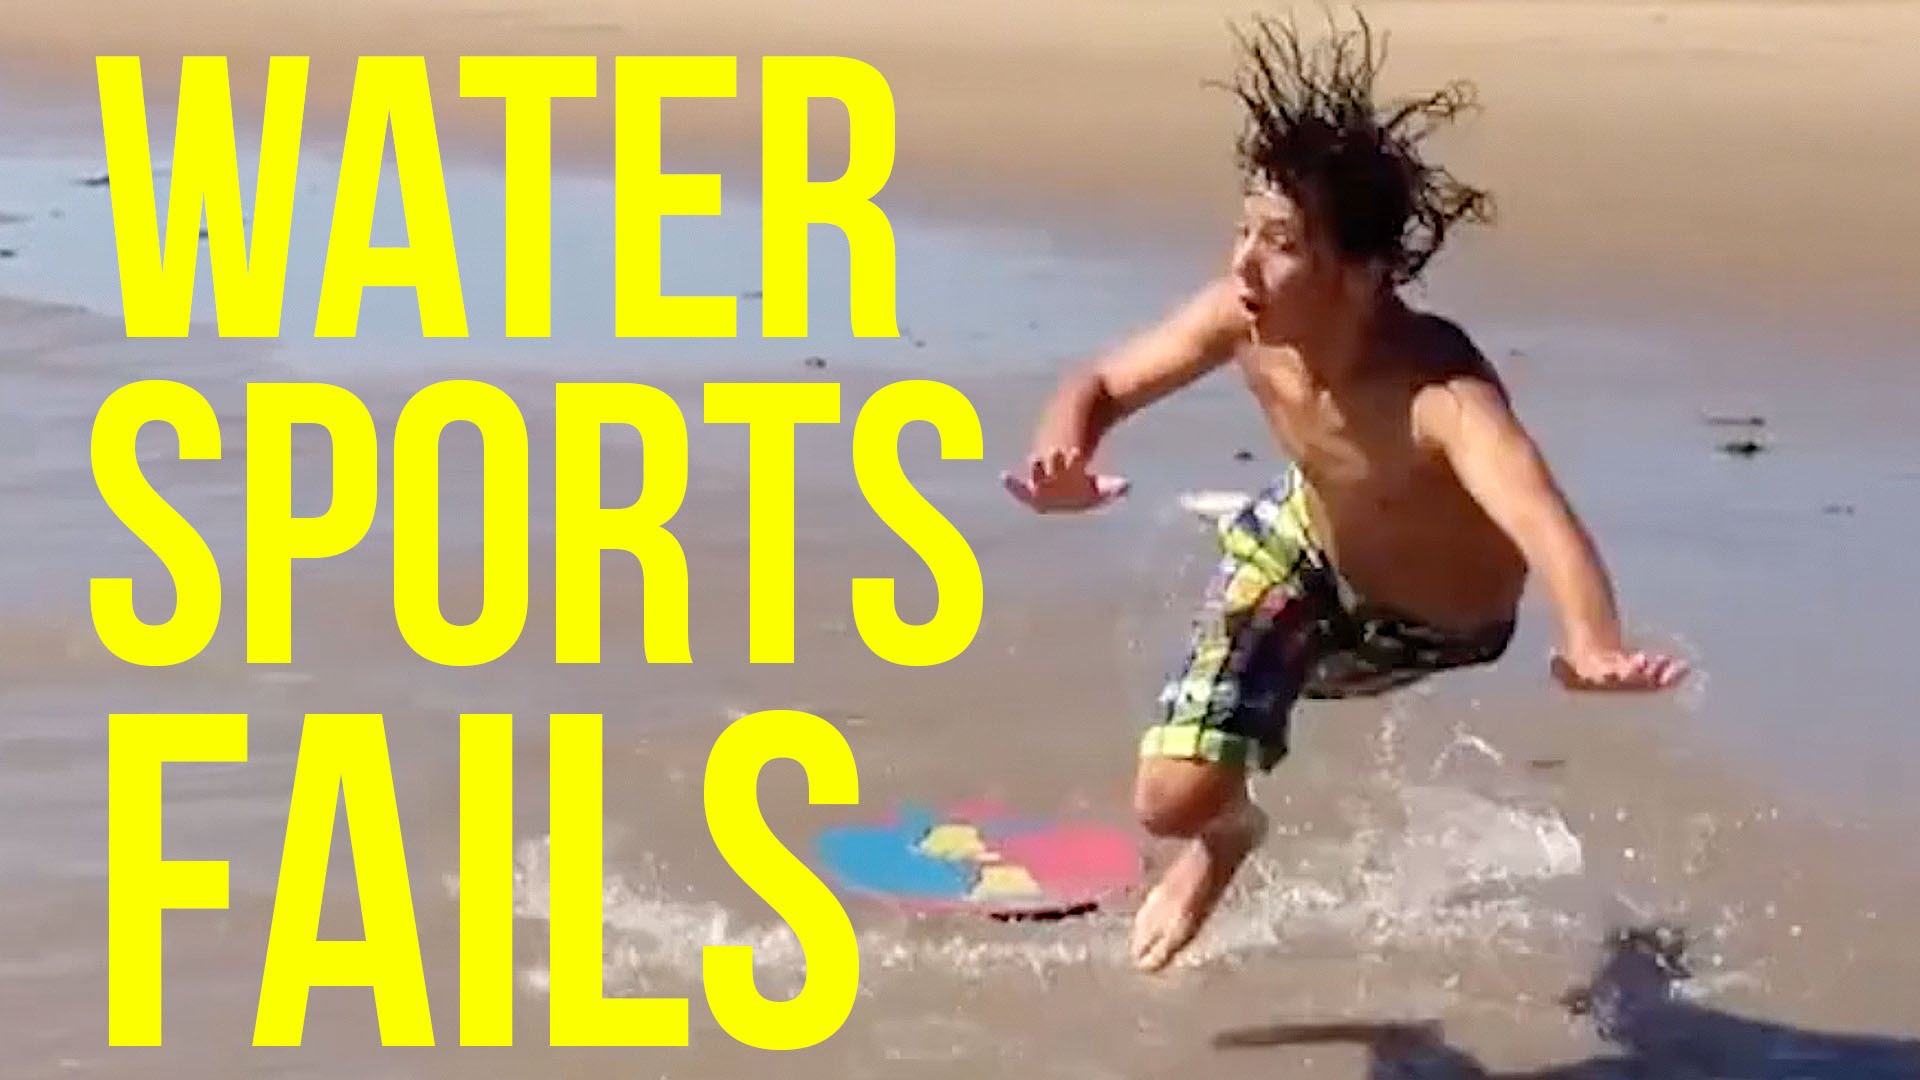 Ultimate Water Sports Fails Compilation || FailArmy